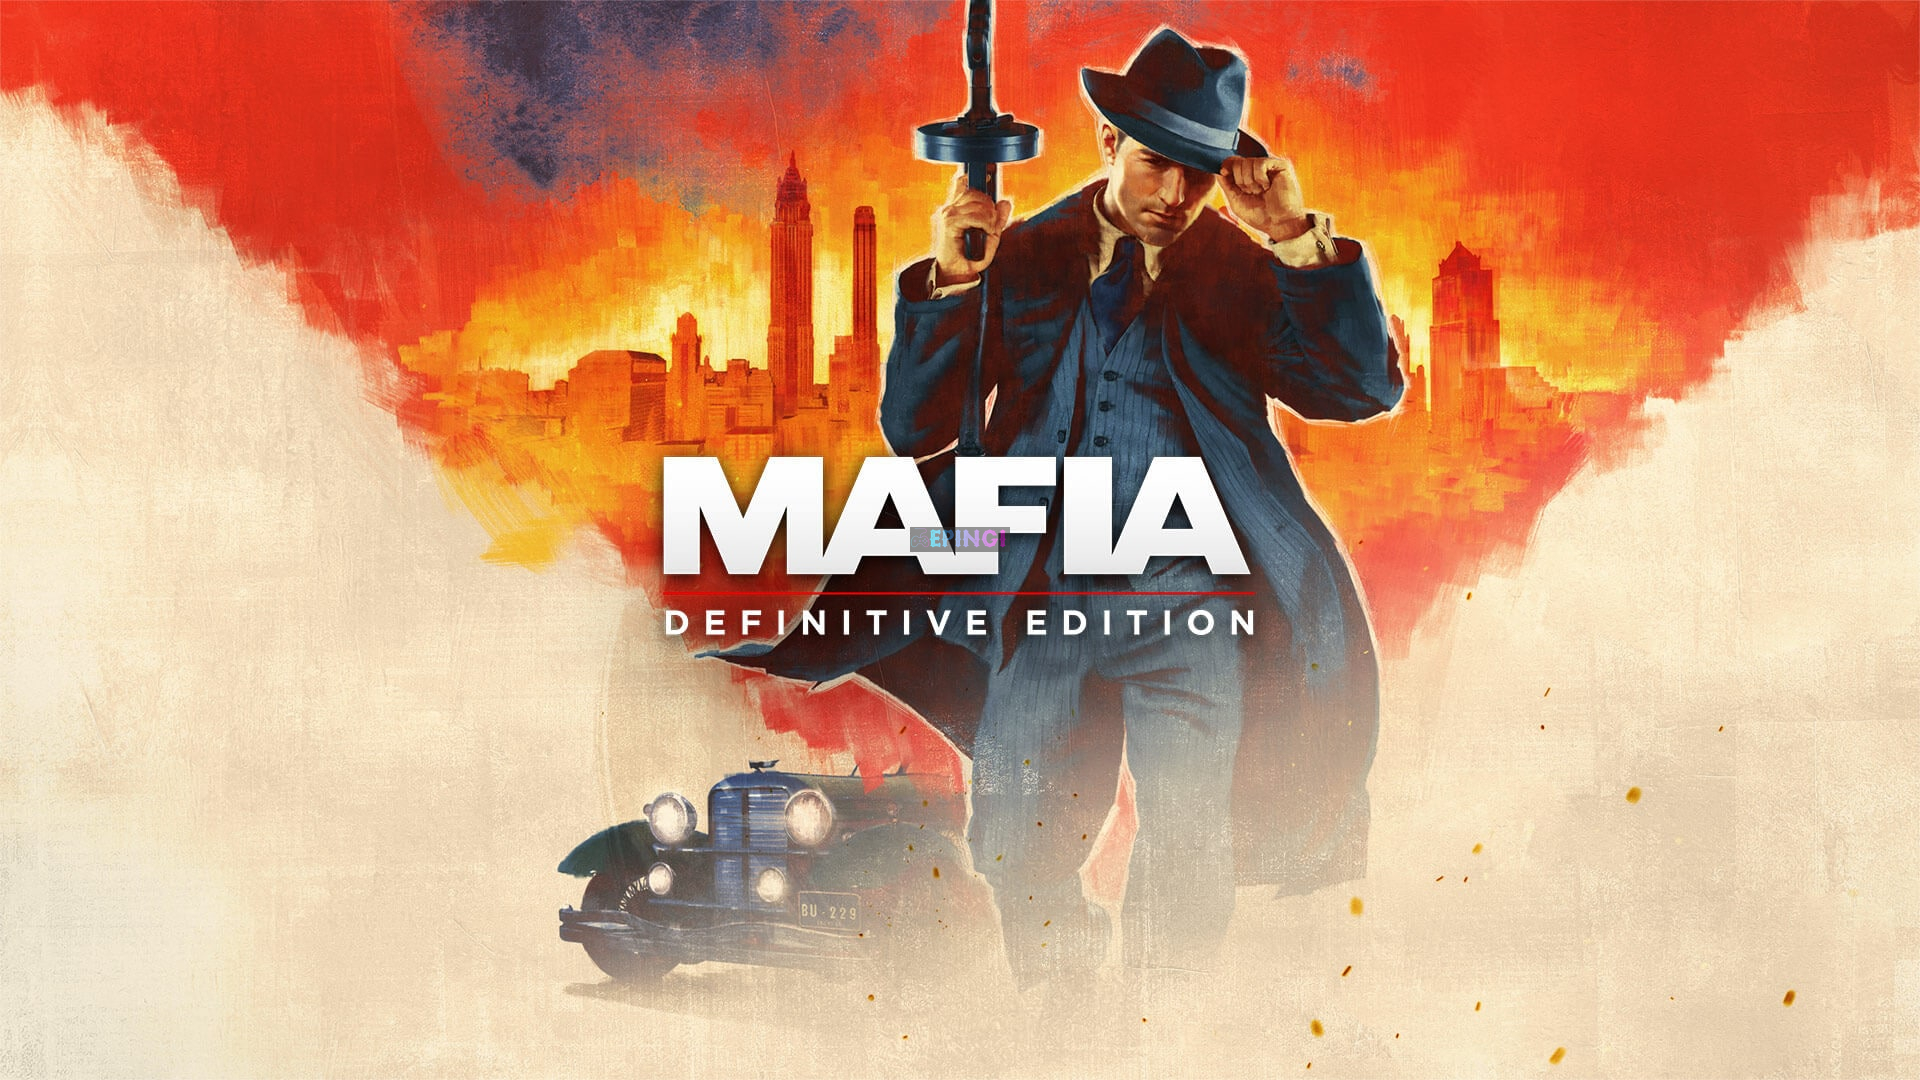 Mafia: Definitive Edition 1.03 Is Out, Here Are The Patch Notes